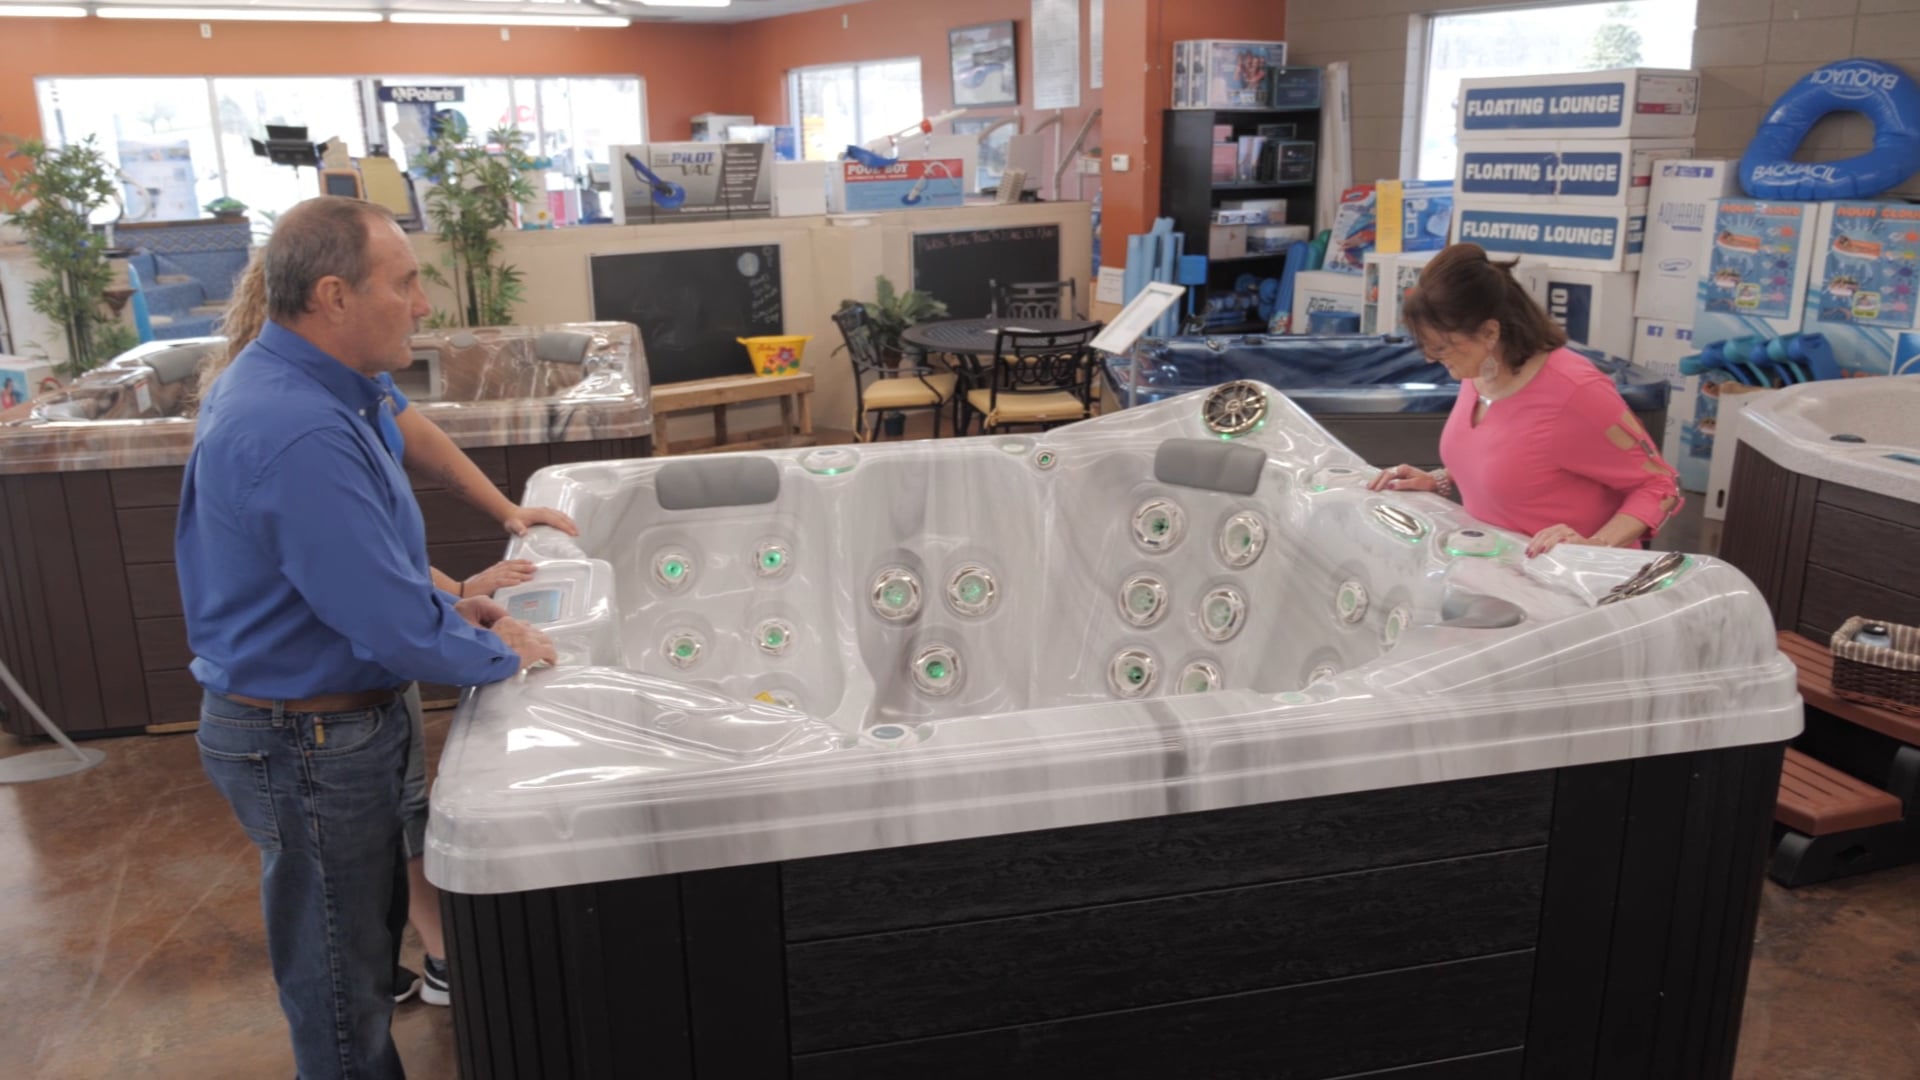 Hot Tubs Sales Managers Customer Stories And Social Videos In Store Hot Tub Customer Story San